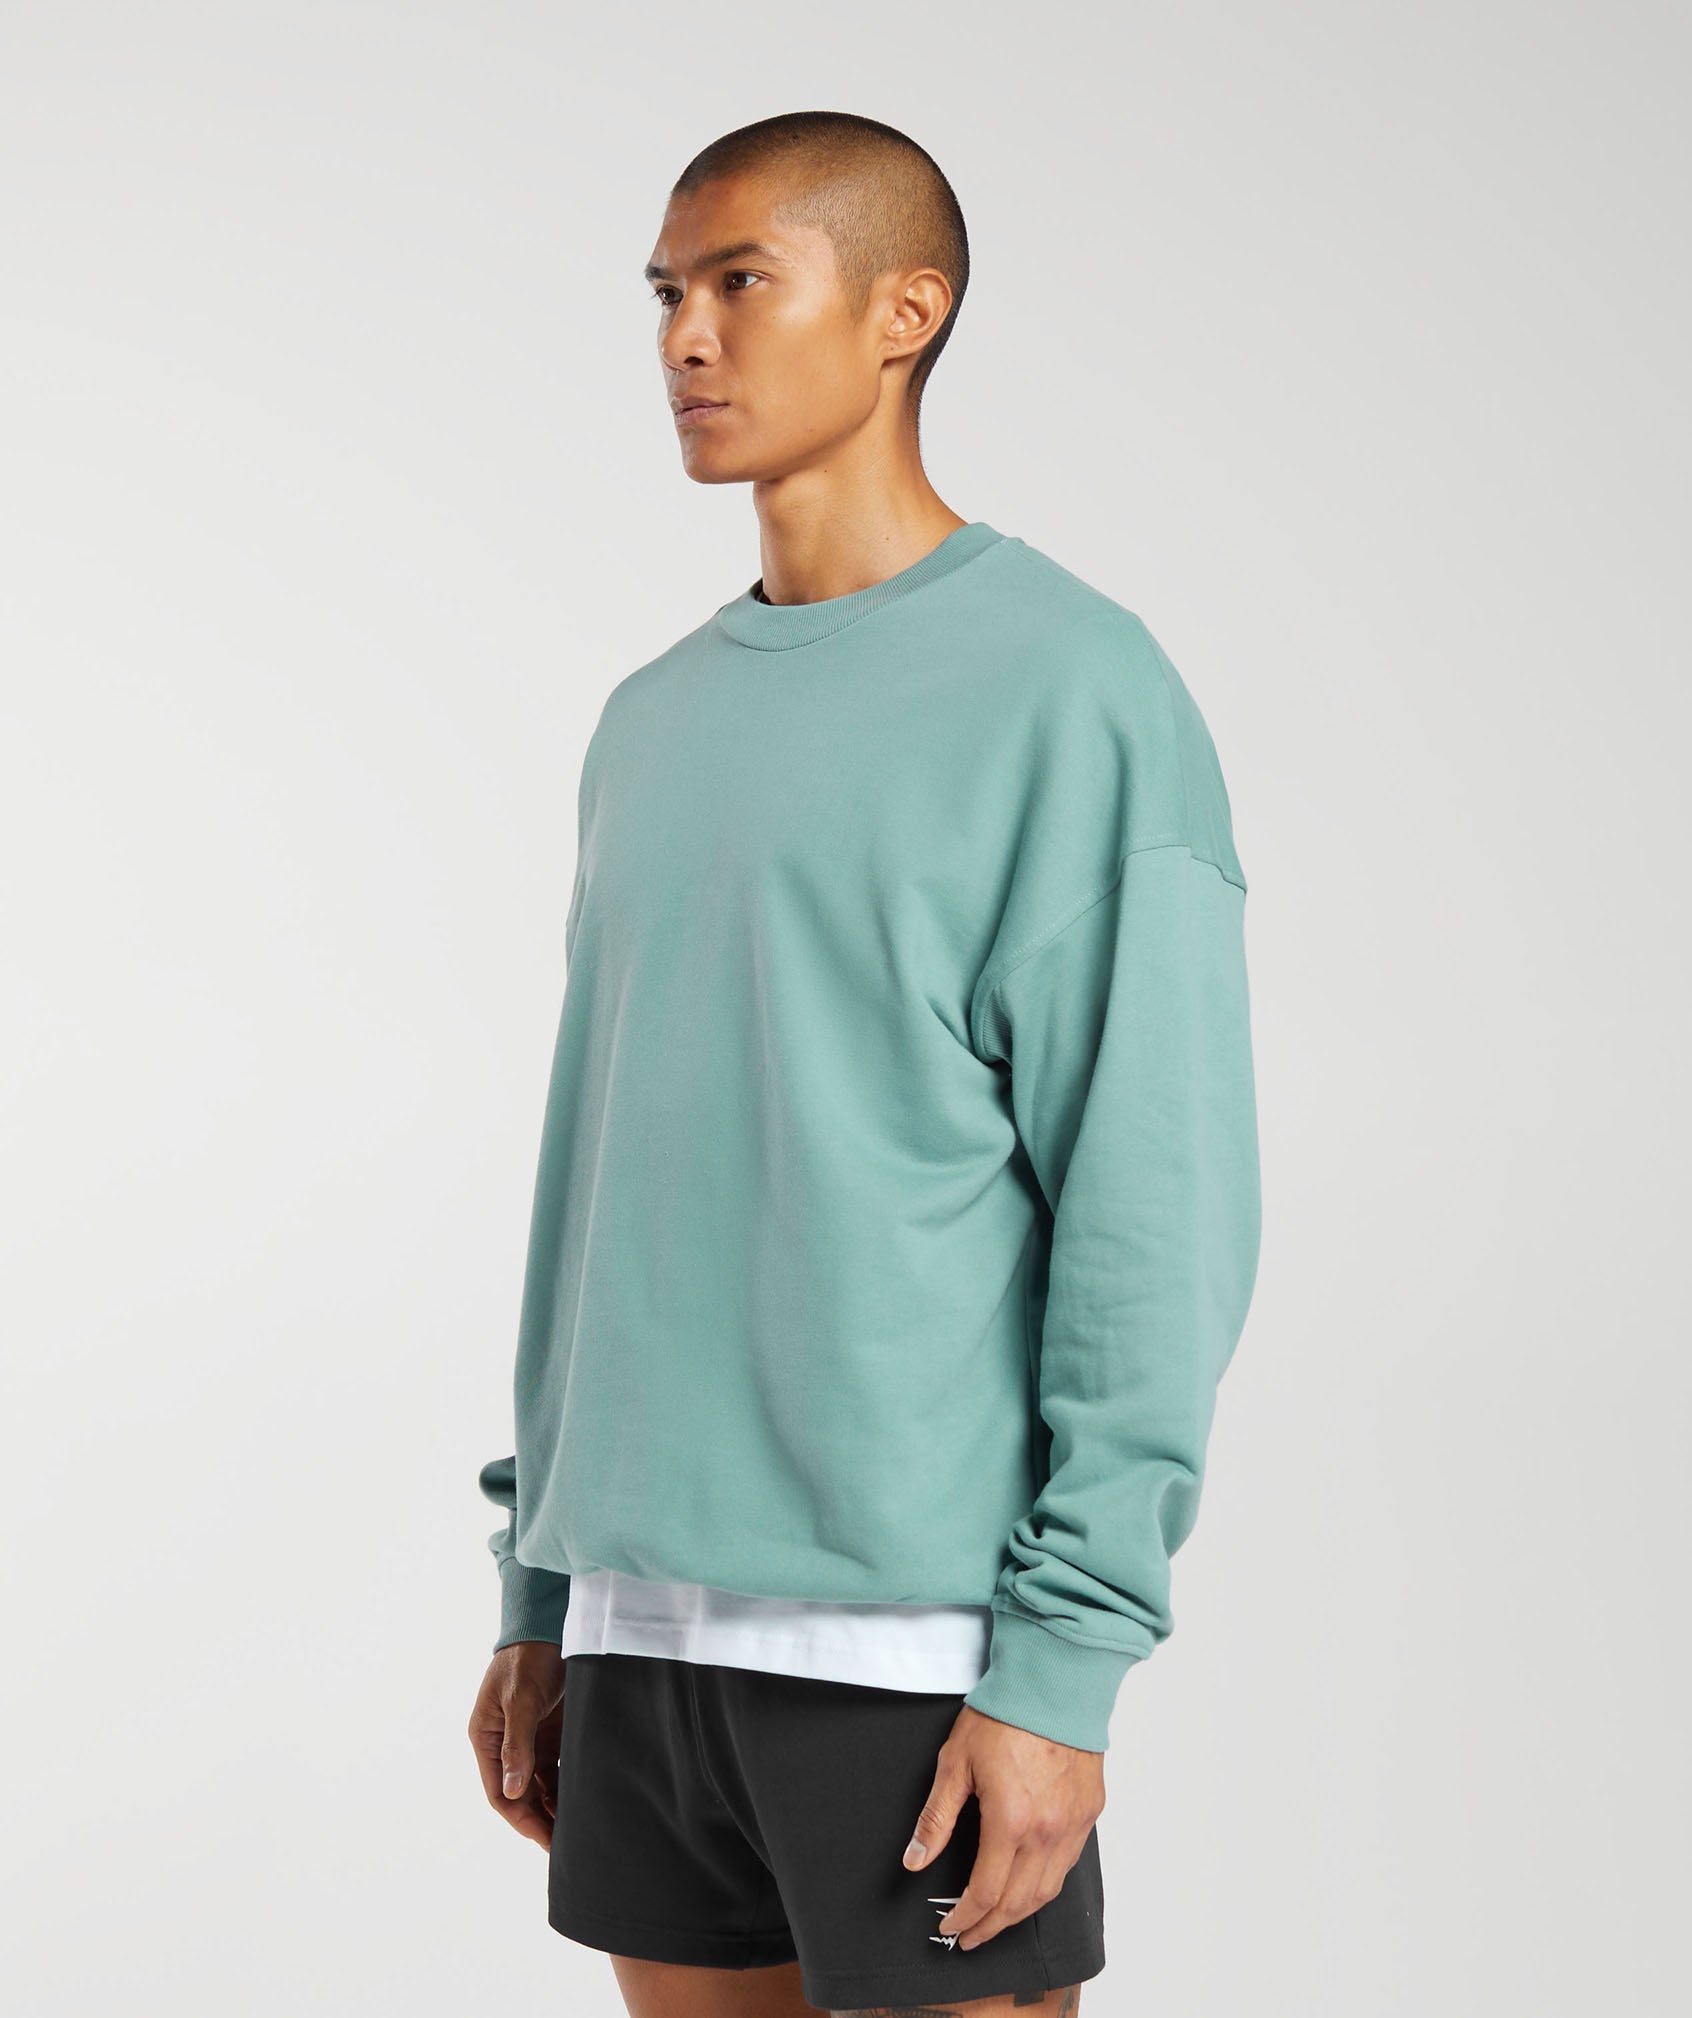 Rest Day Essential Crew in Duck Egg Blue - view 3